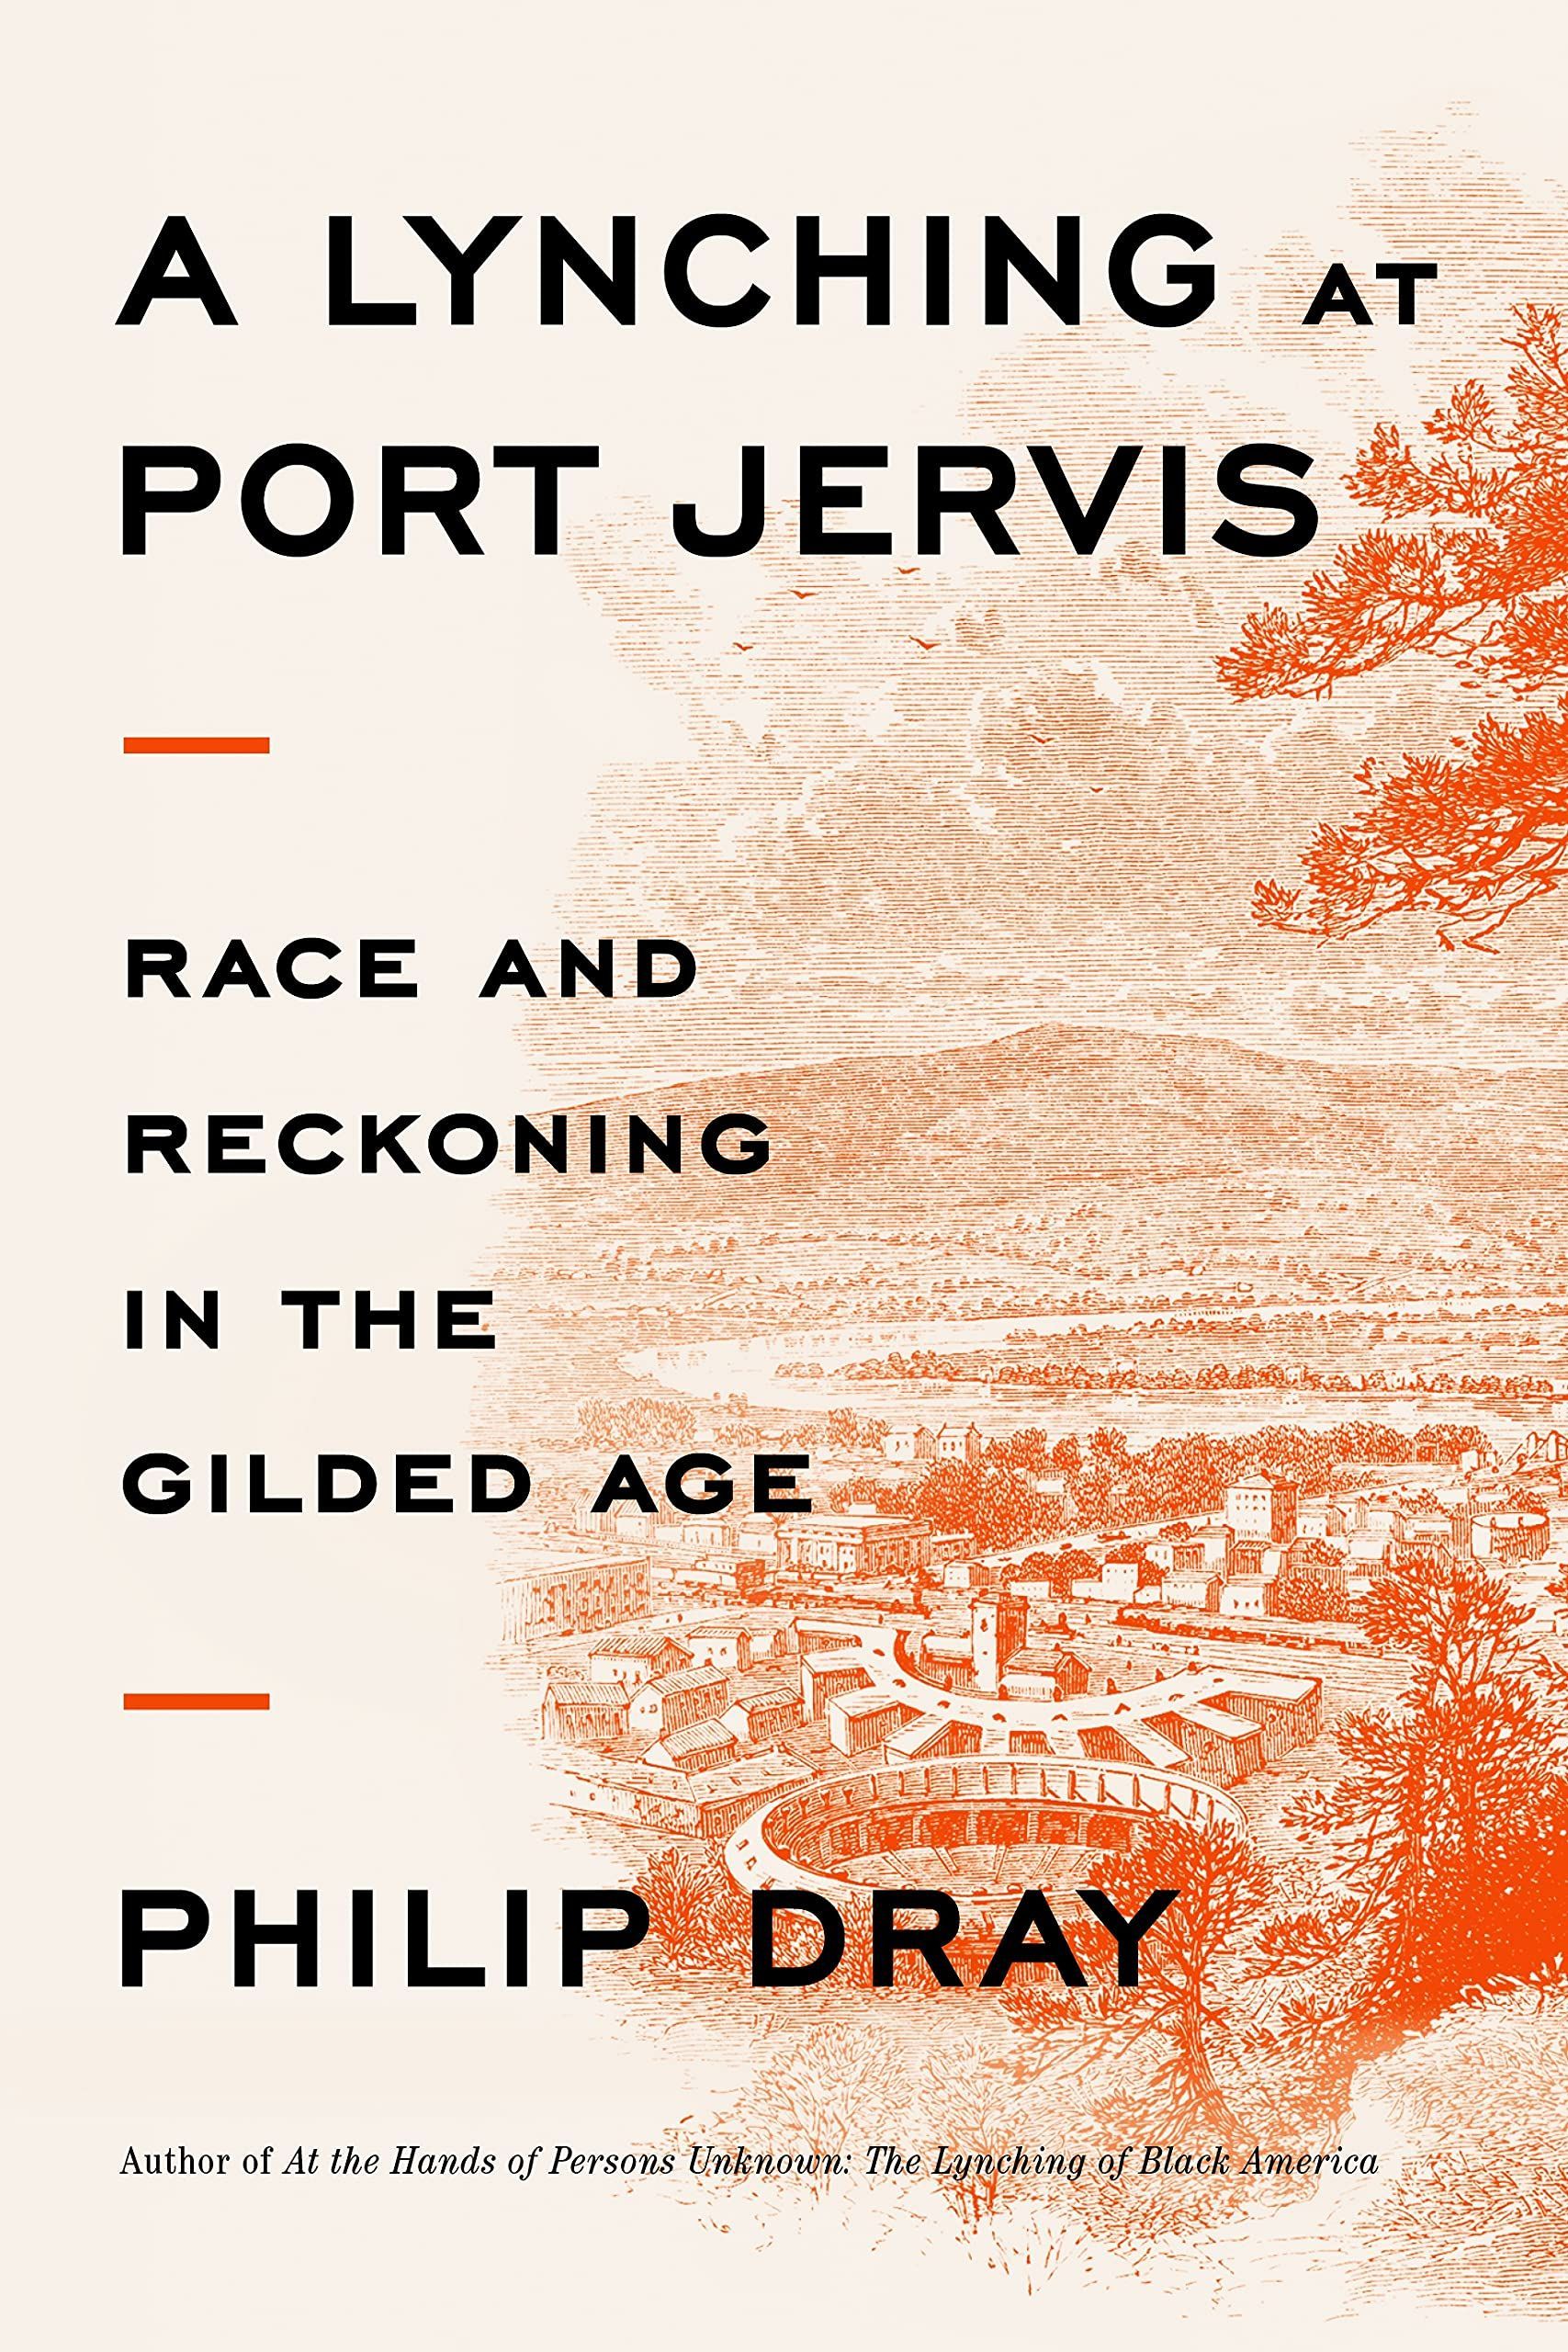 Death by Northern White Hands: On Philip Dray’s “A Lynching at Port Jervis”